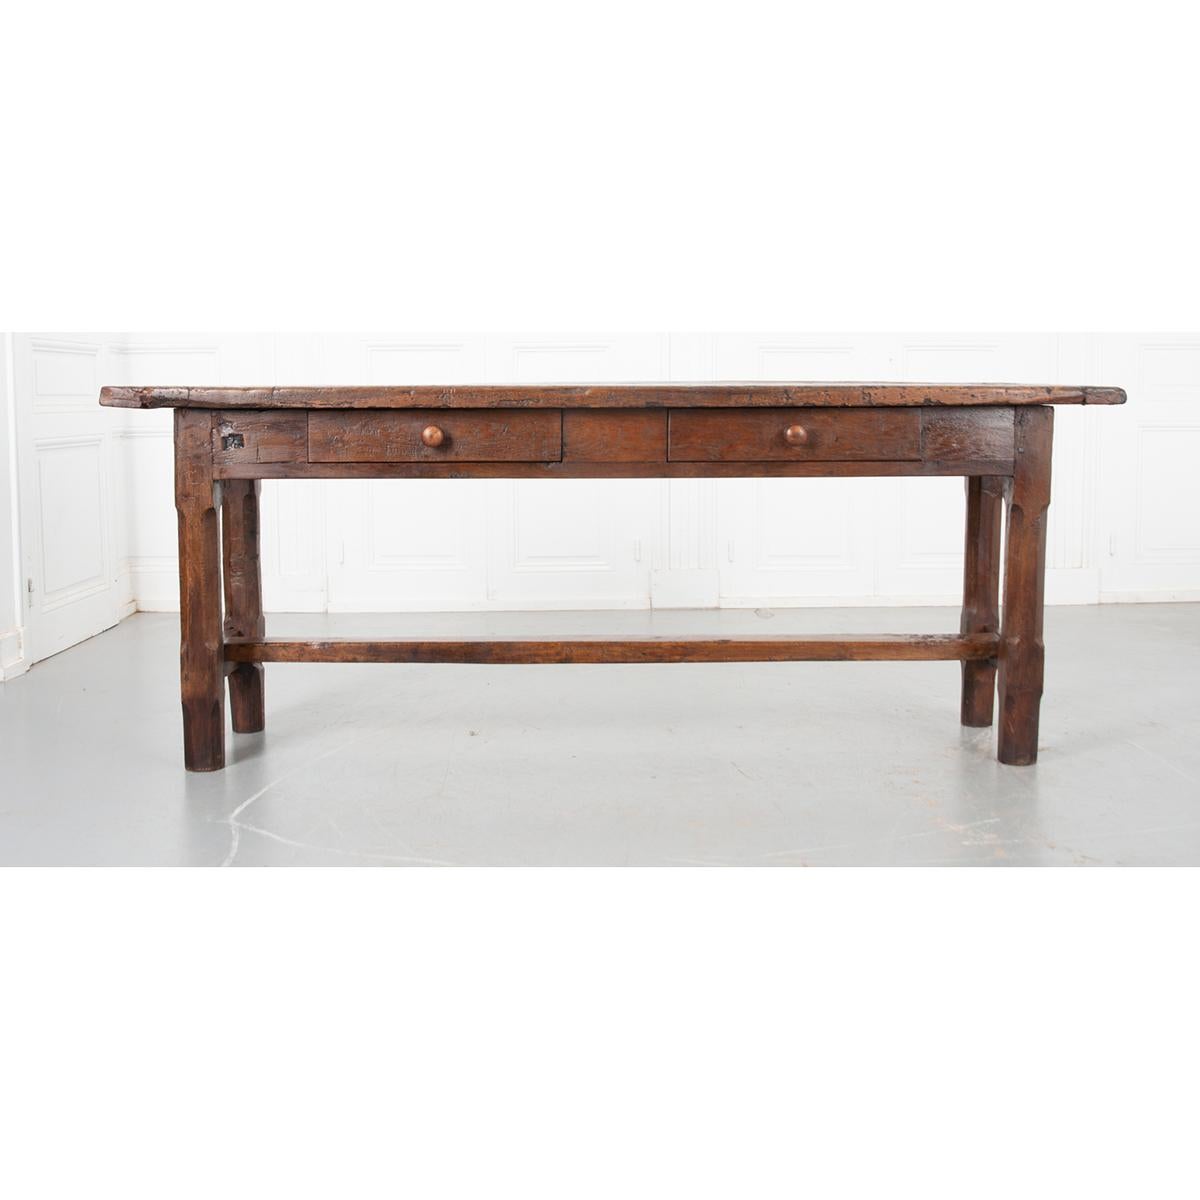 This primitive oak console has a gorgeous patia that shows off the rich color and age of the wood. Sitting upon a rectangular apron with two nice-sized front drawers, fitted with turned wooden pulls. The whole is supported by sturdy carved fluted